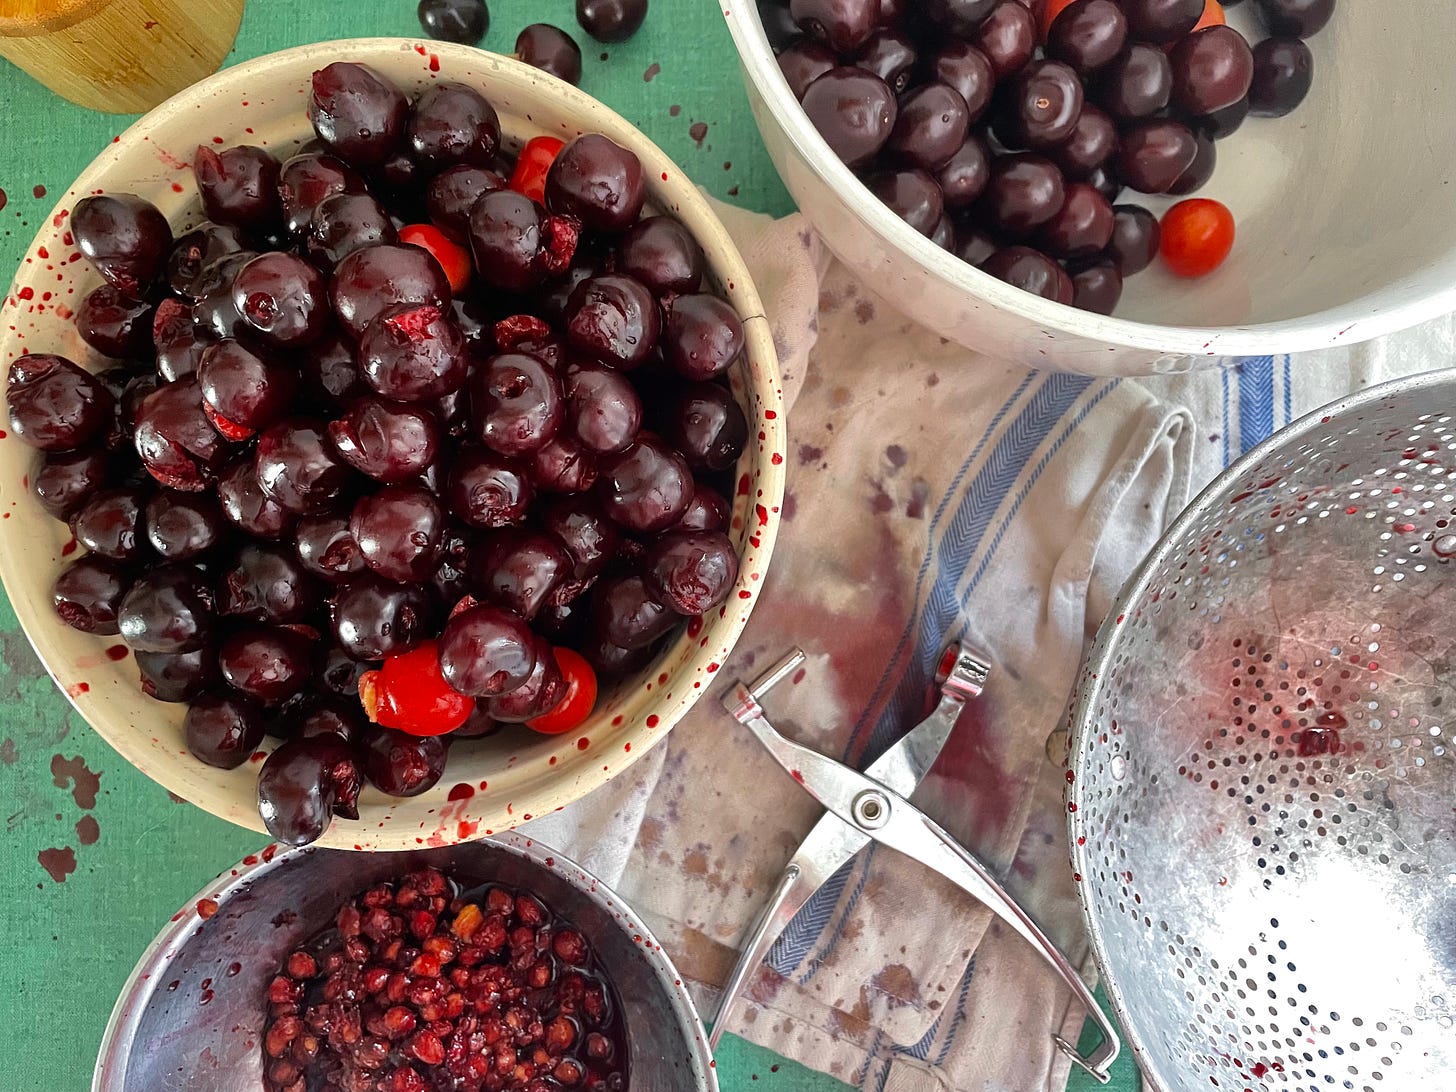 A scene of pitting cherries. There is a yellow bowl near the center with pitted cherries. There’s a white bowl partly out of frame with whole cherries. There’s also a bowl of cherry pits, a colander, and a handheld cherry pitter. All of these atop a Kelly green counter that has a cotton towel on it. Cherry splatters and stains everywhere.